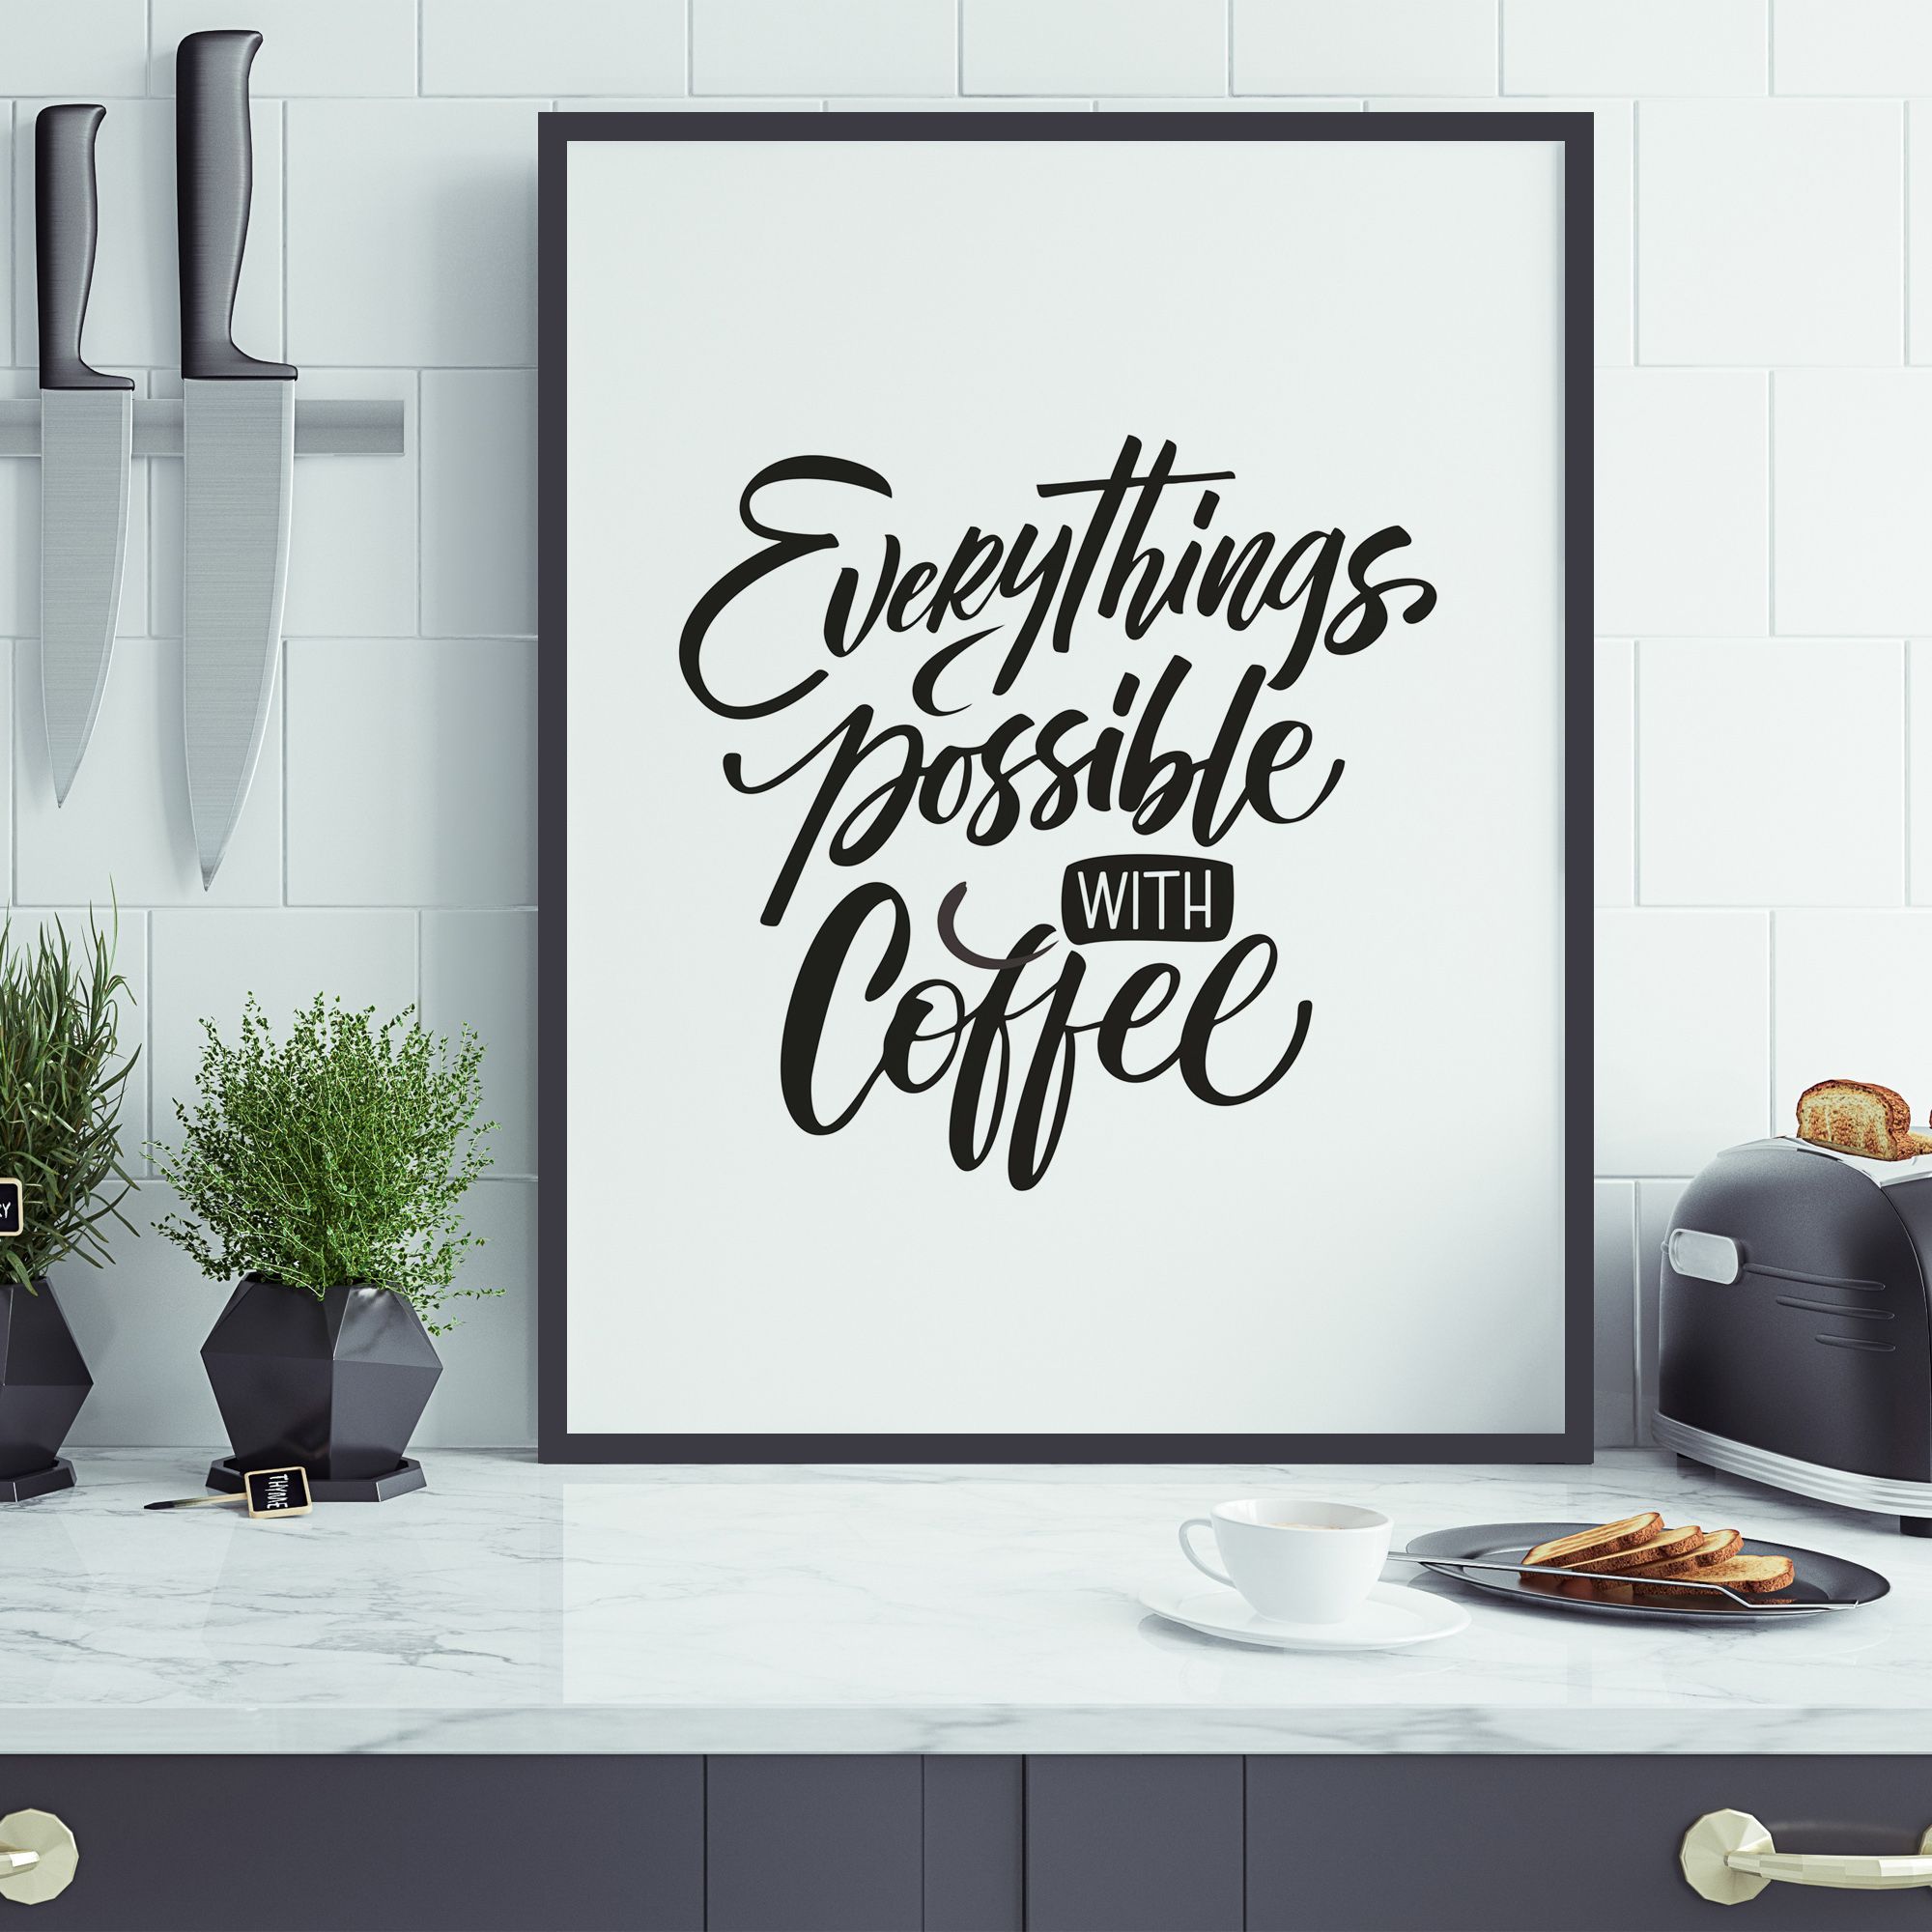 Постер "Everything is possible with coffee"